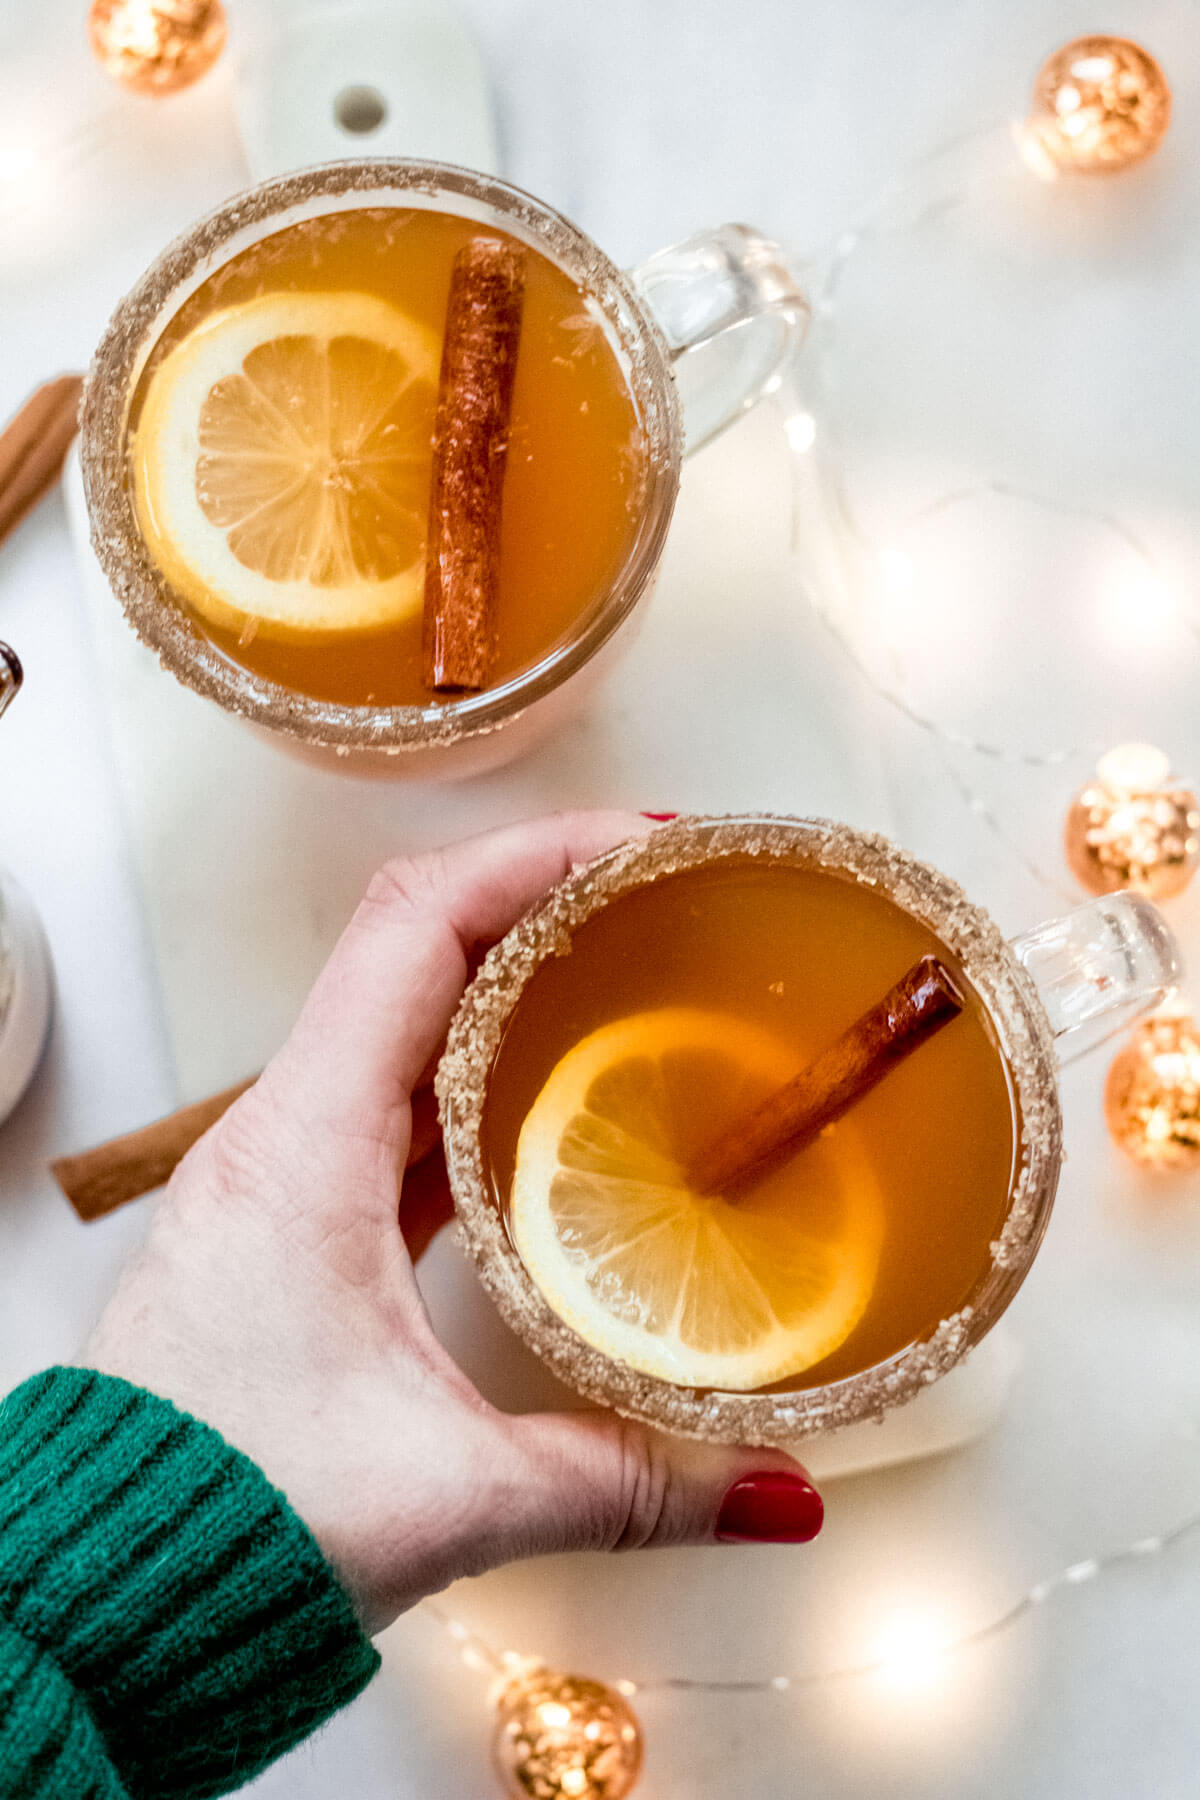 hand holding a peach cardamom hot toddy on a white background with twinkly lights